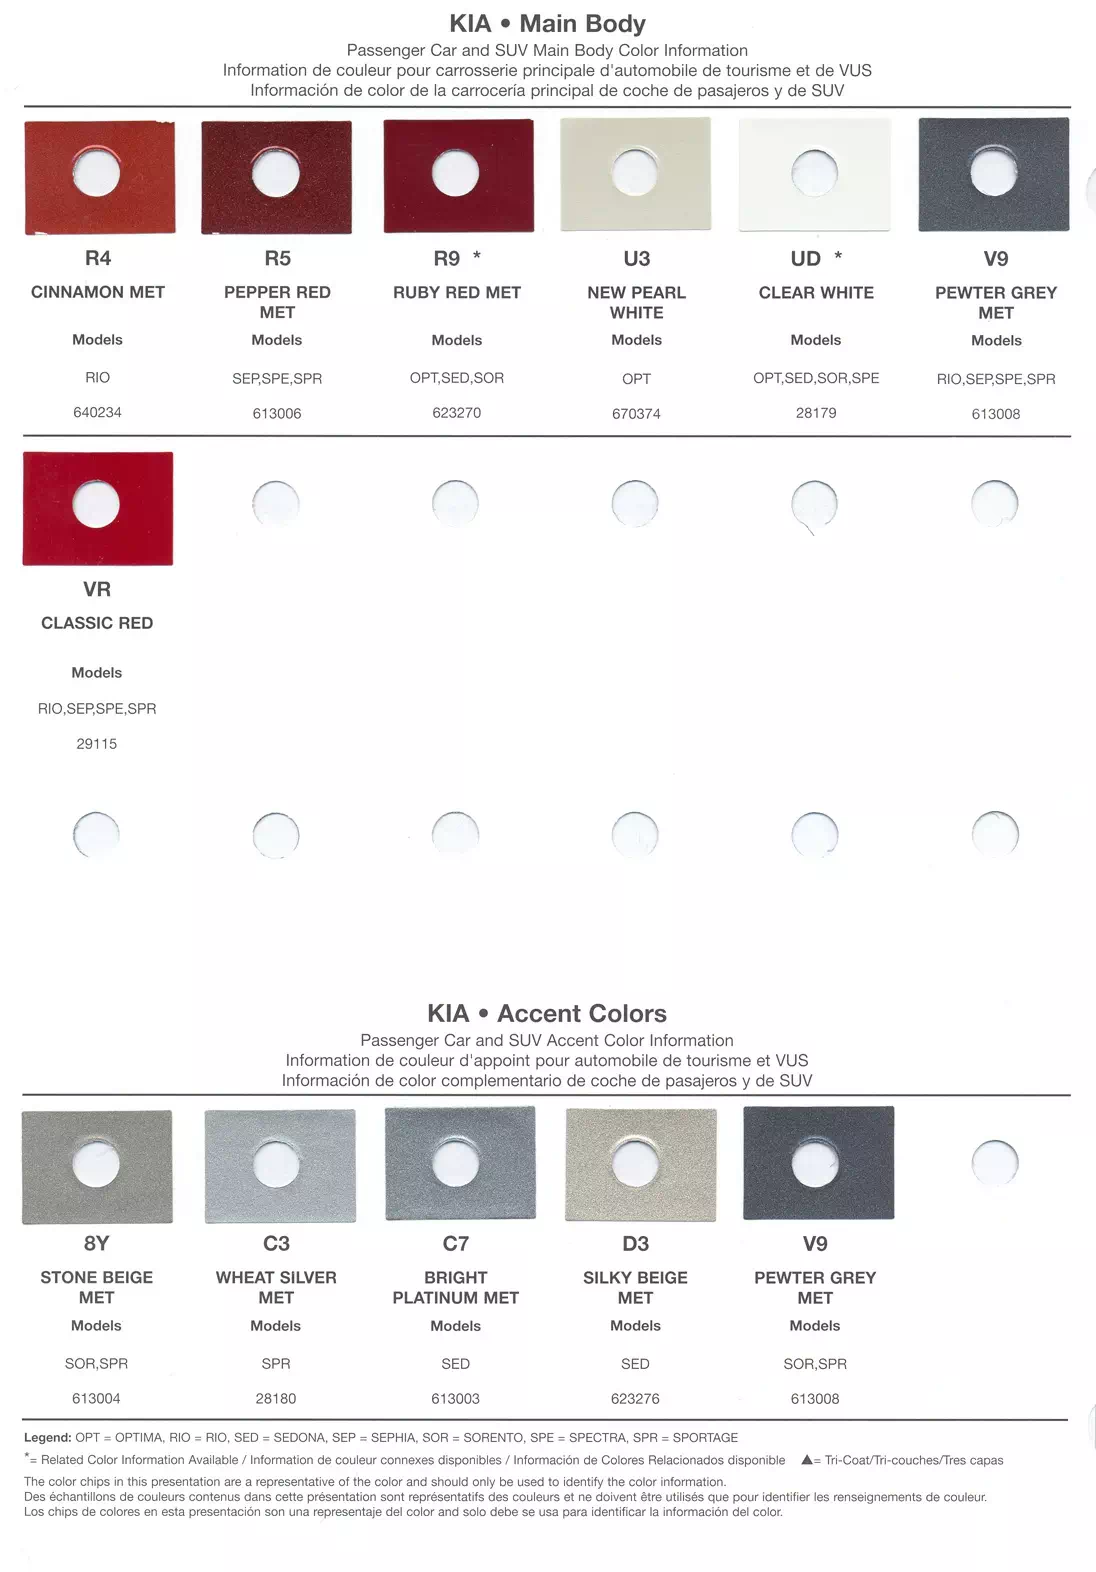 Exterior Paint Colors for Kia Vehicles in 2003